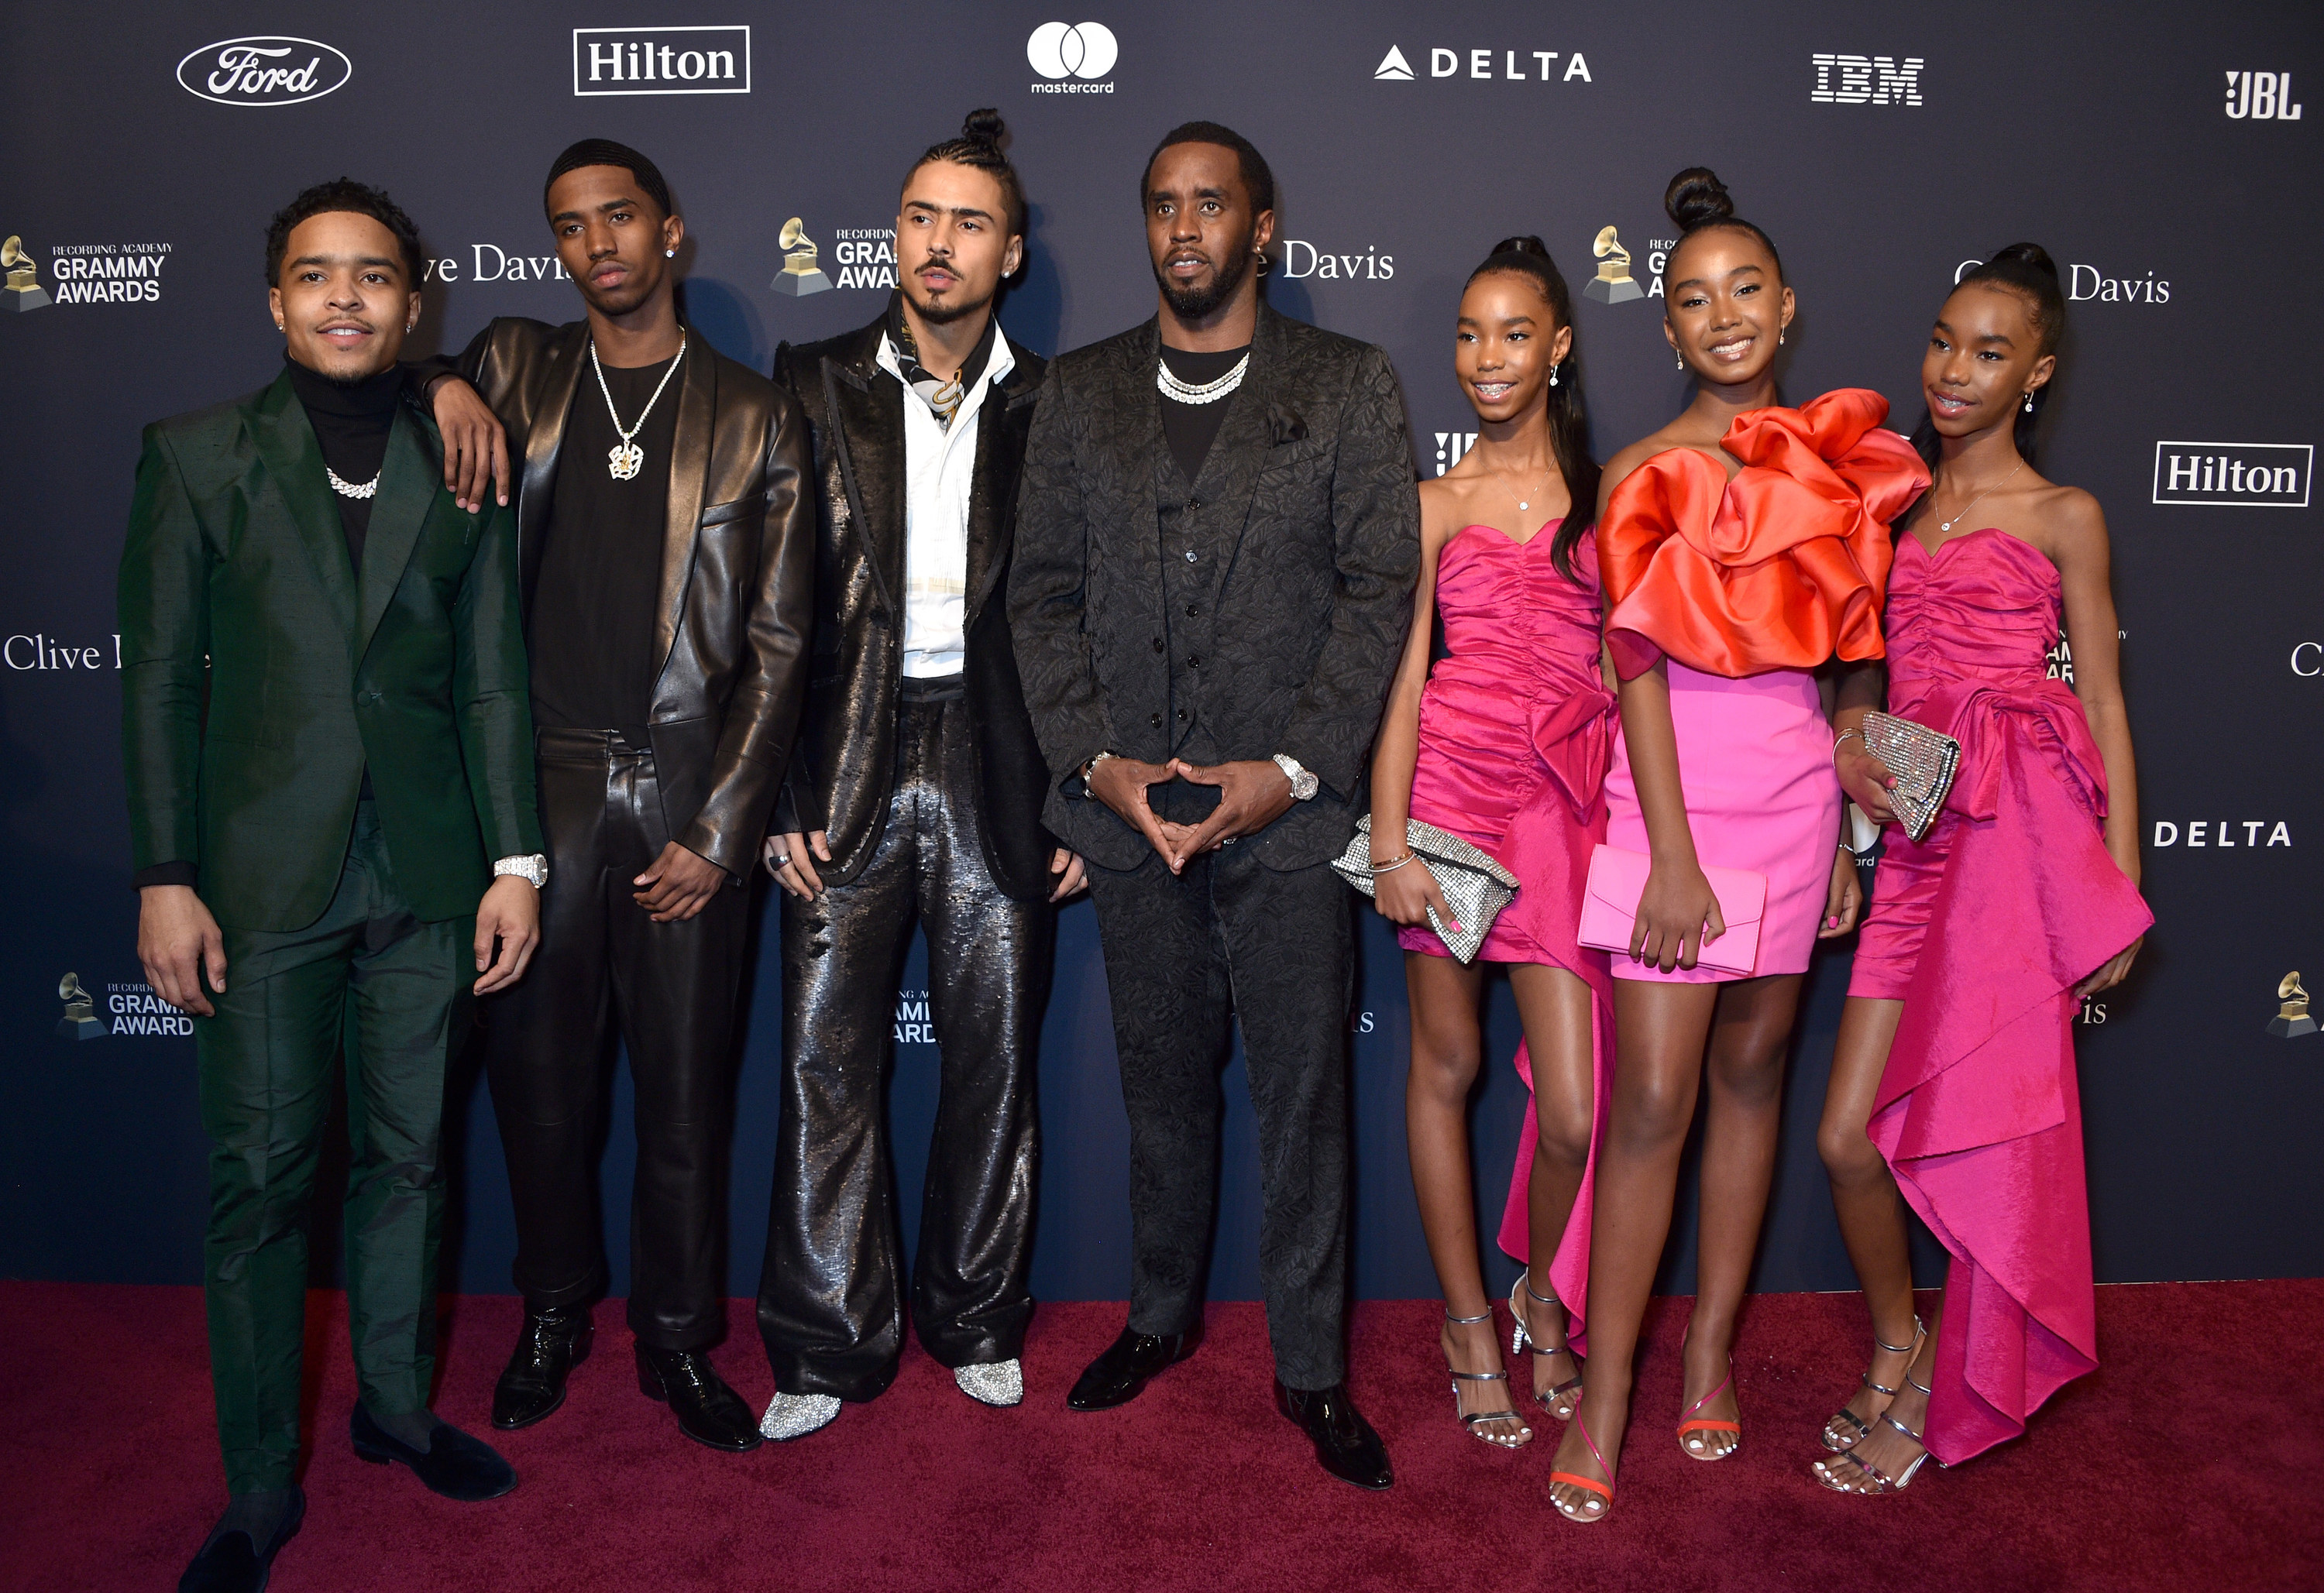 Diddy poses with his children on a red carpet